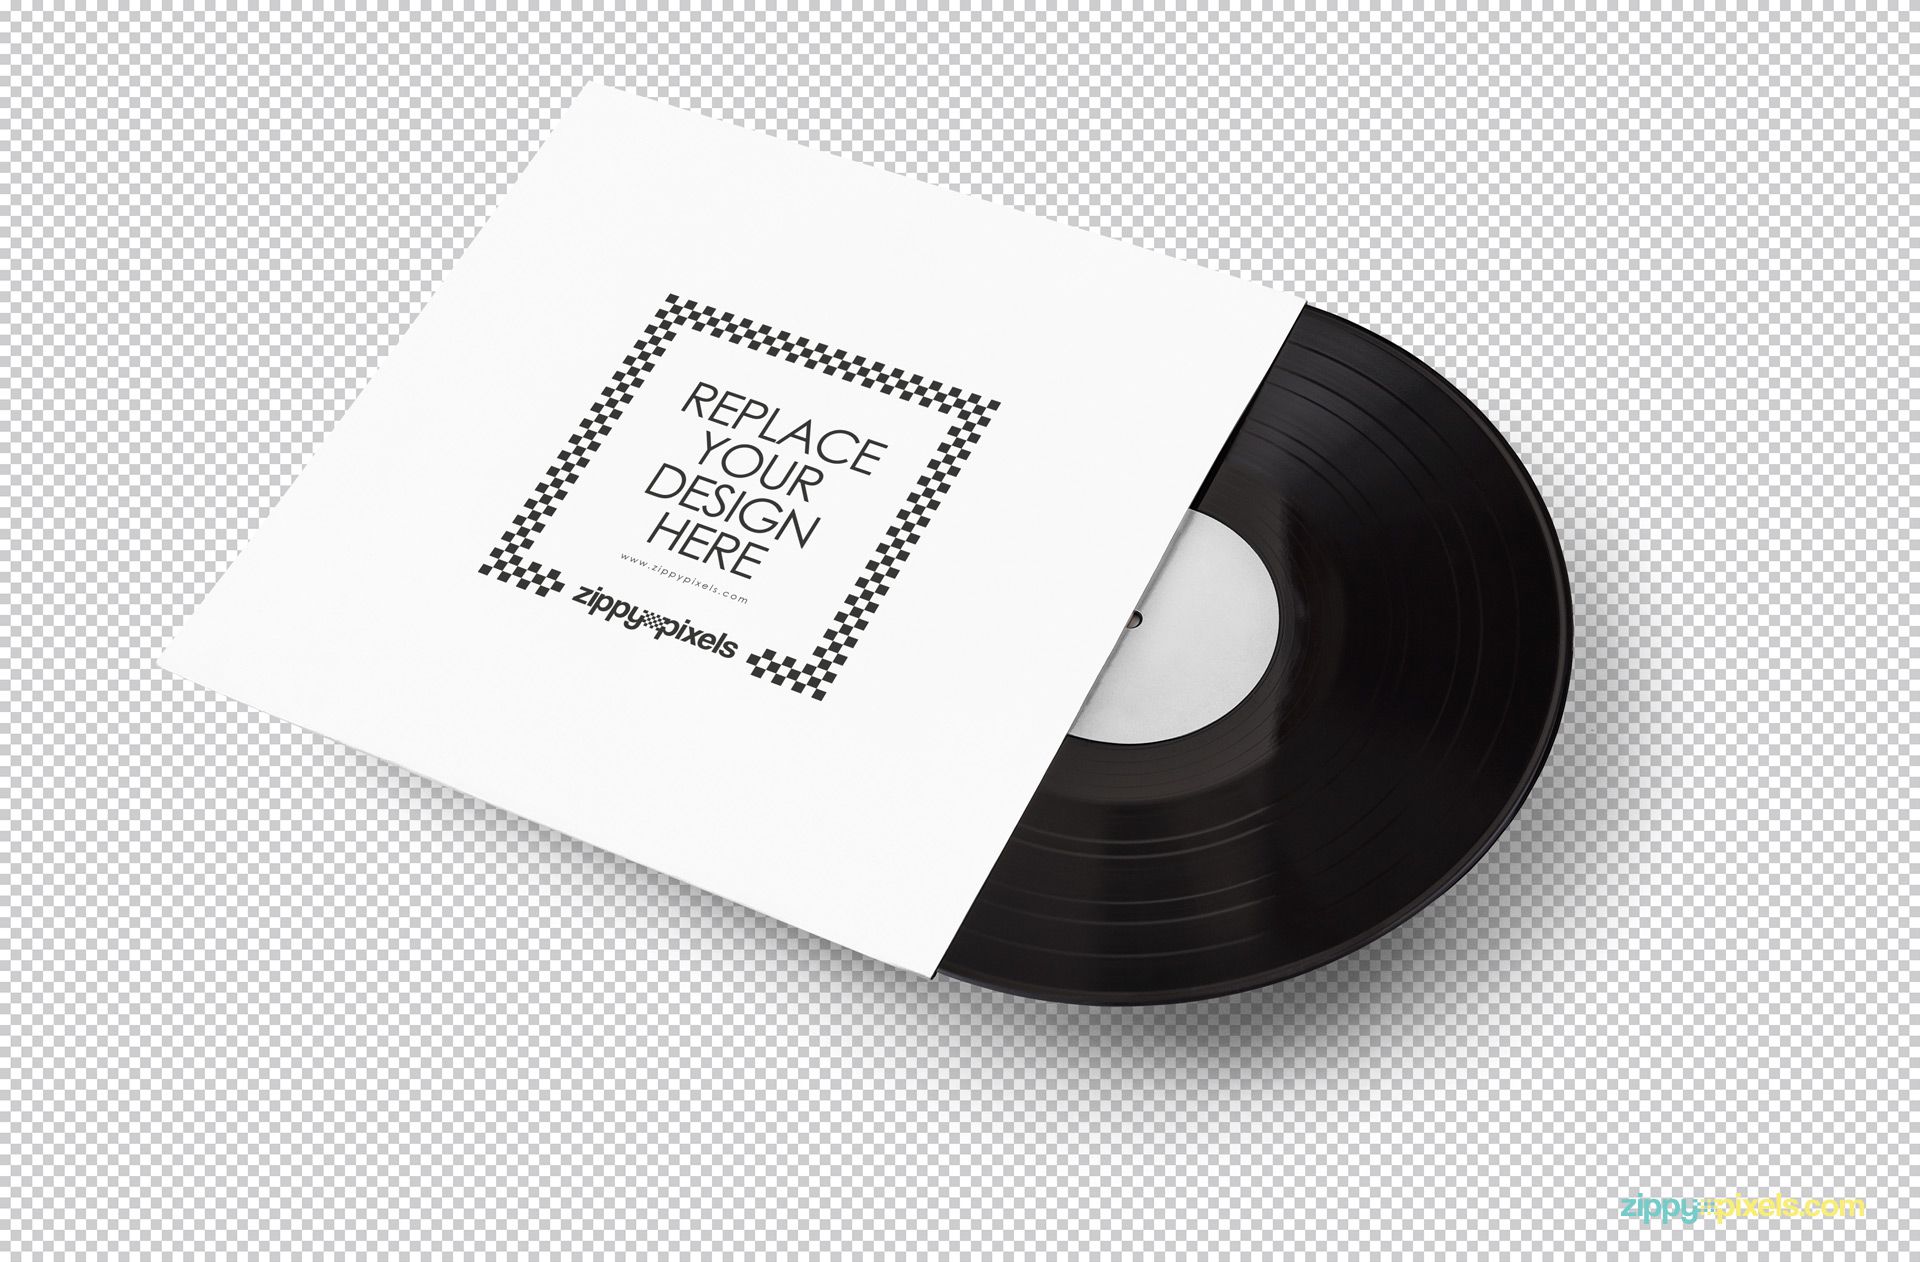 Record mockup with design option.